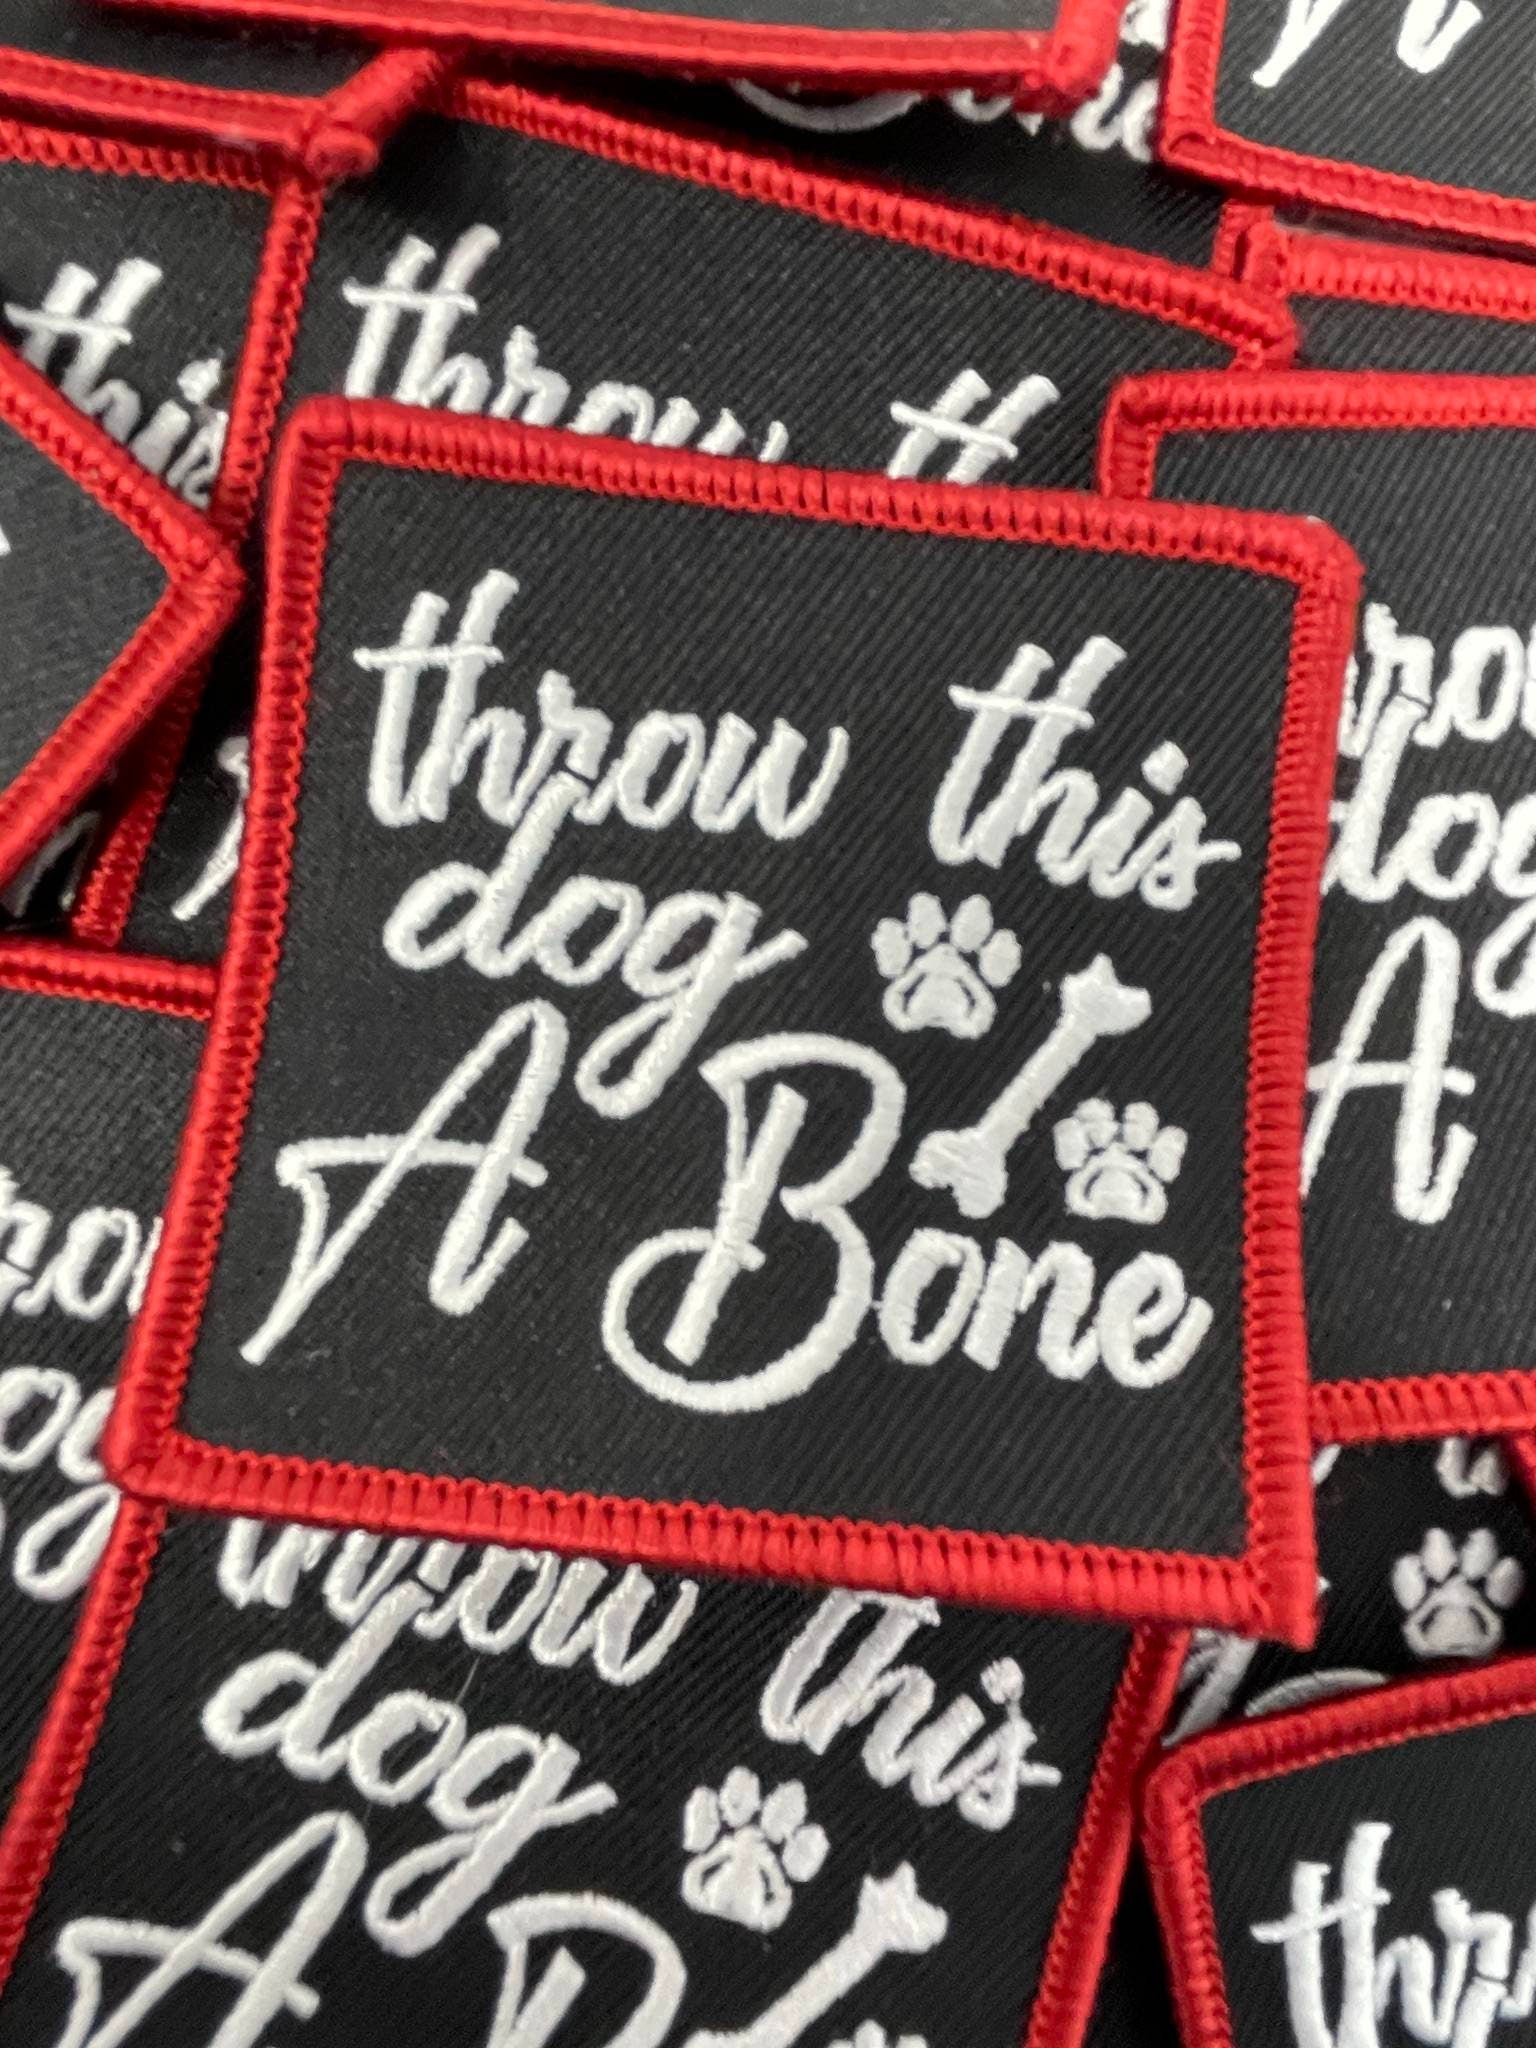 Patched Up Pup: "Throw This Dog a Bone" Iron-on Embroidered Patch, Patches for Dog Lovers, Gifts for Your Dog, Sz. 2.5", Doggy Vest Patch